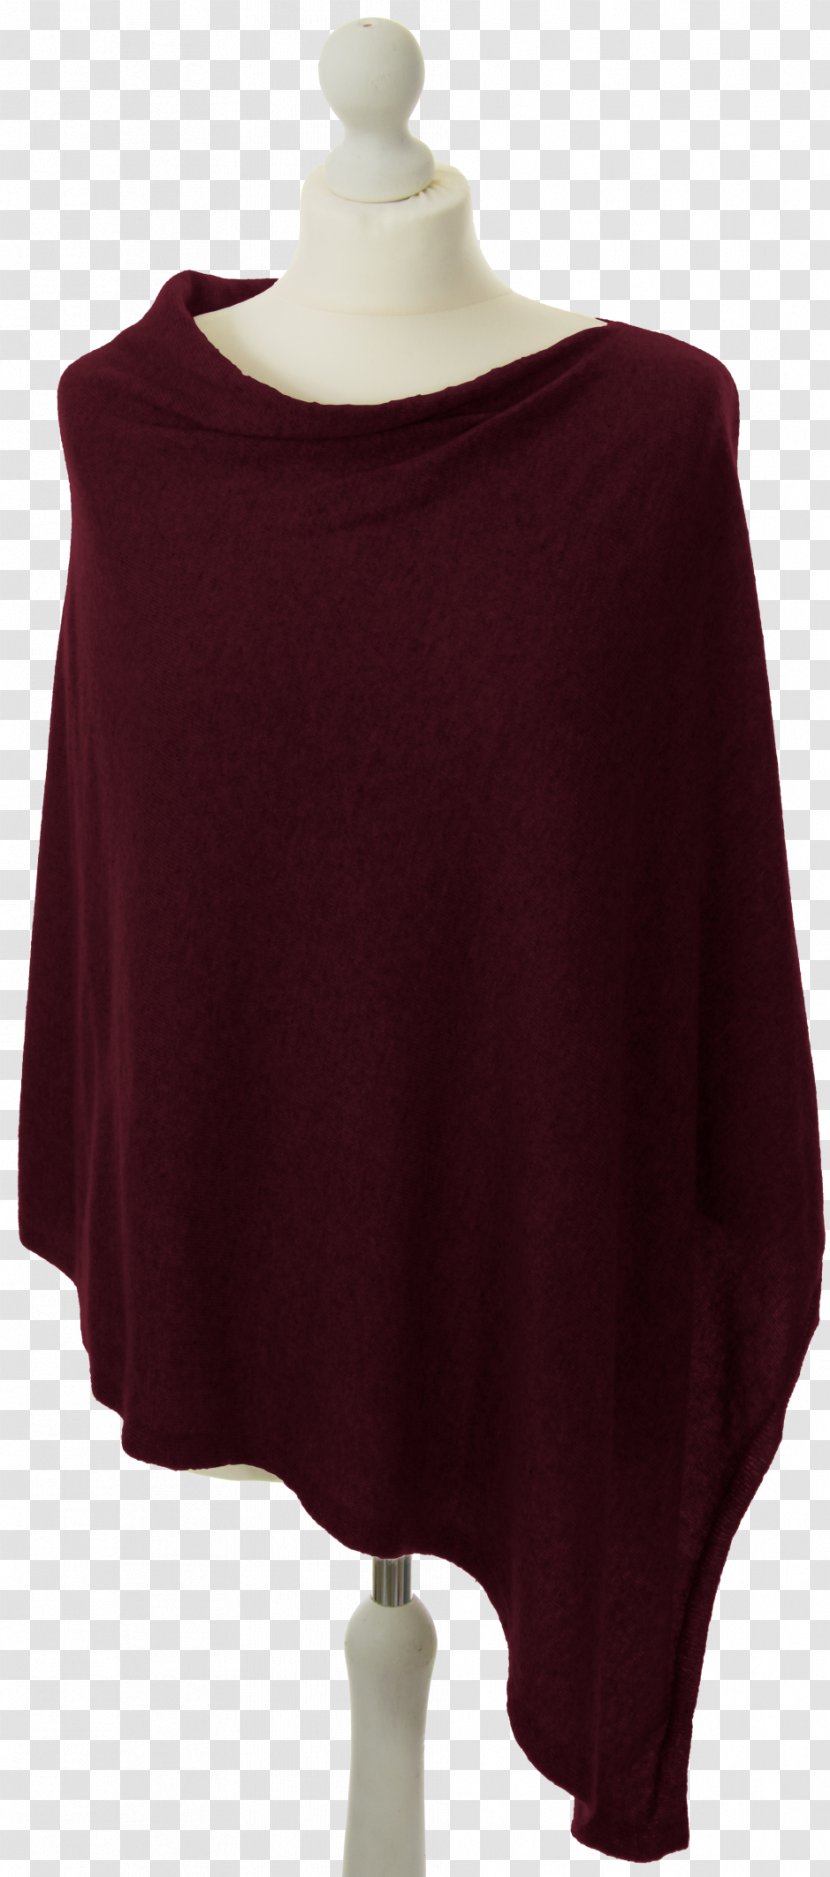 Cashmere Wool Clothing Poncho Sleeve - Maroon - Fake Fur Transparent PNG